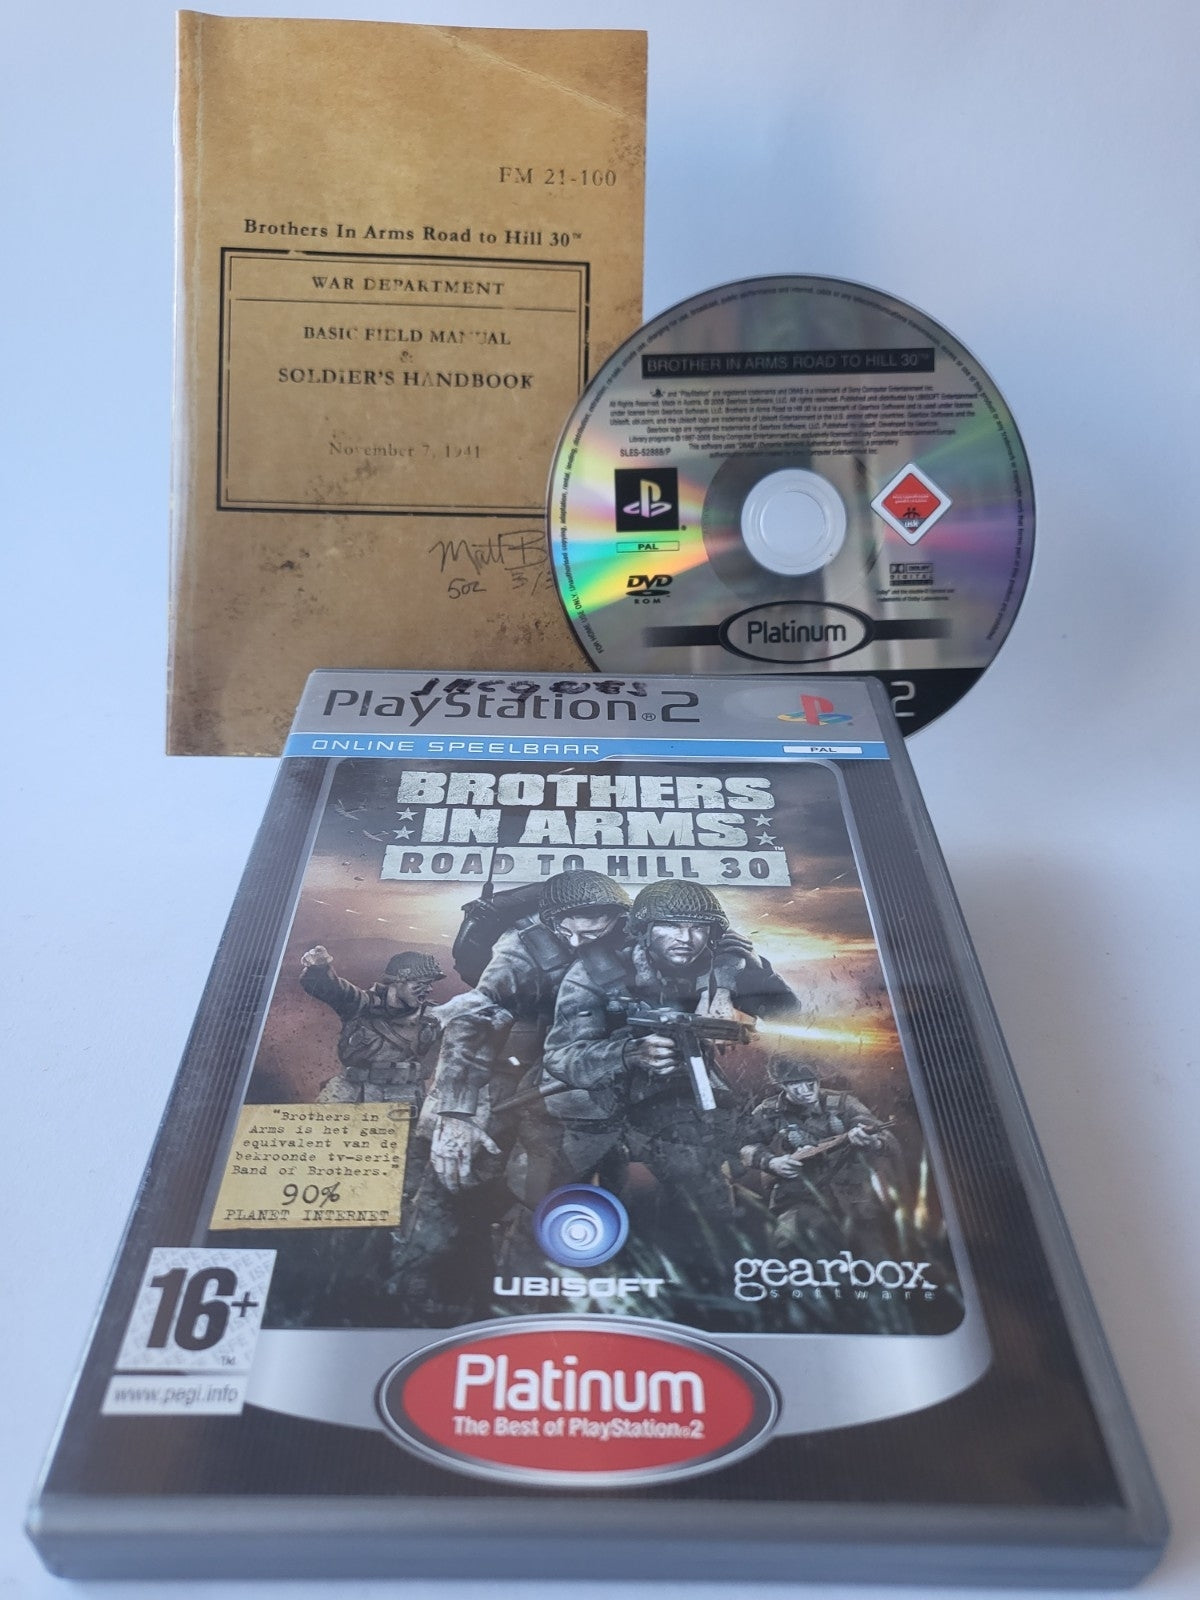 Brothers in Arms Road to Hill 30 Platinum Edition Playstation 2